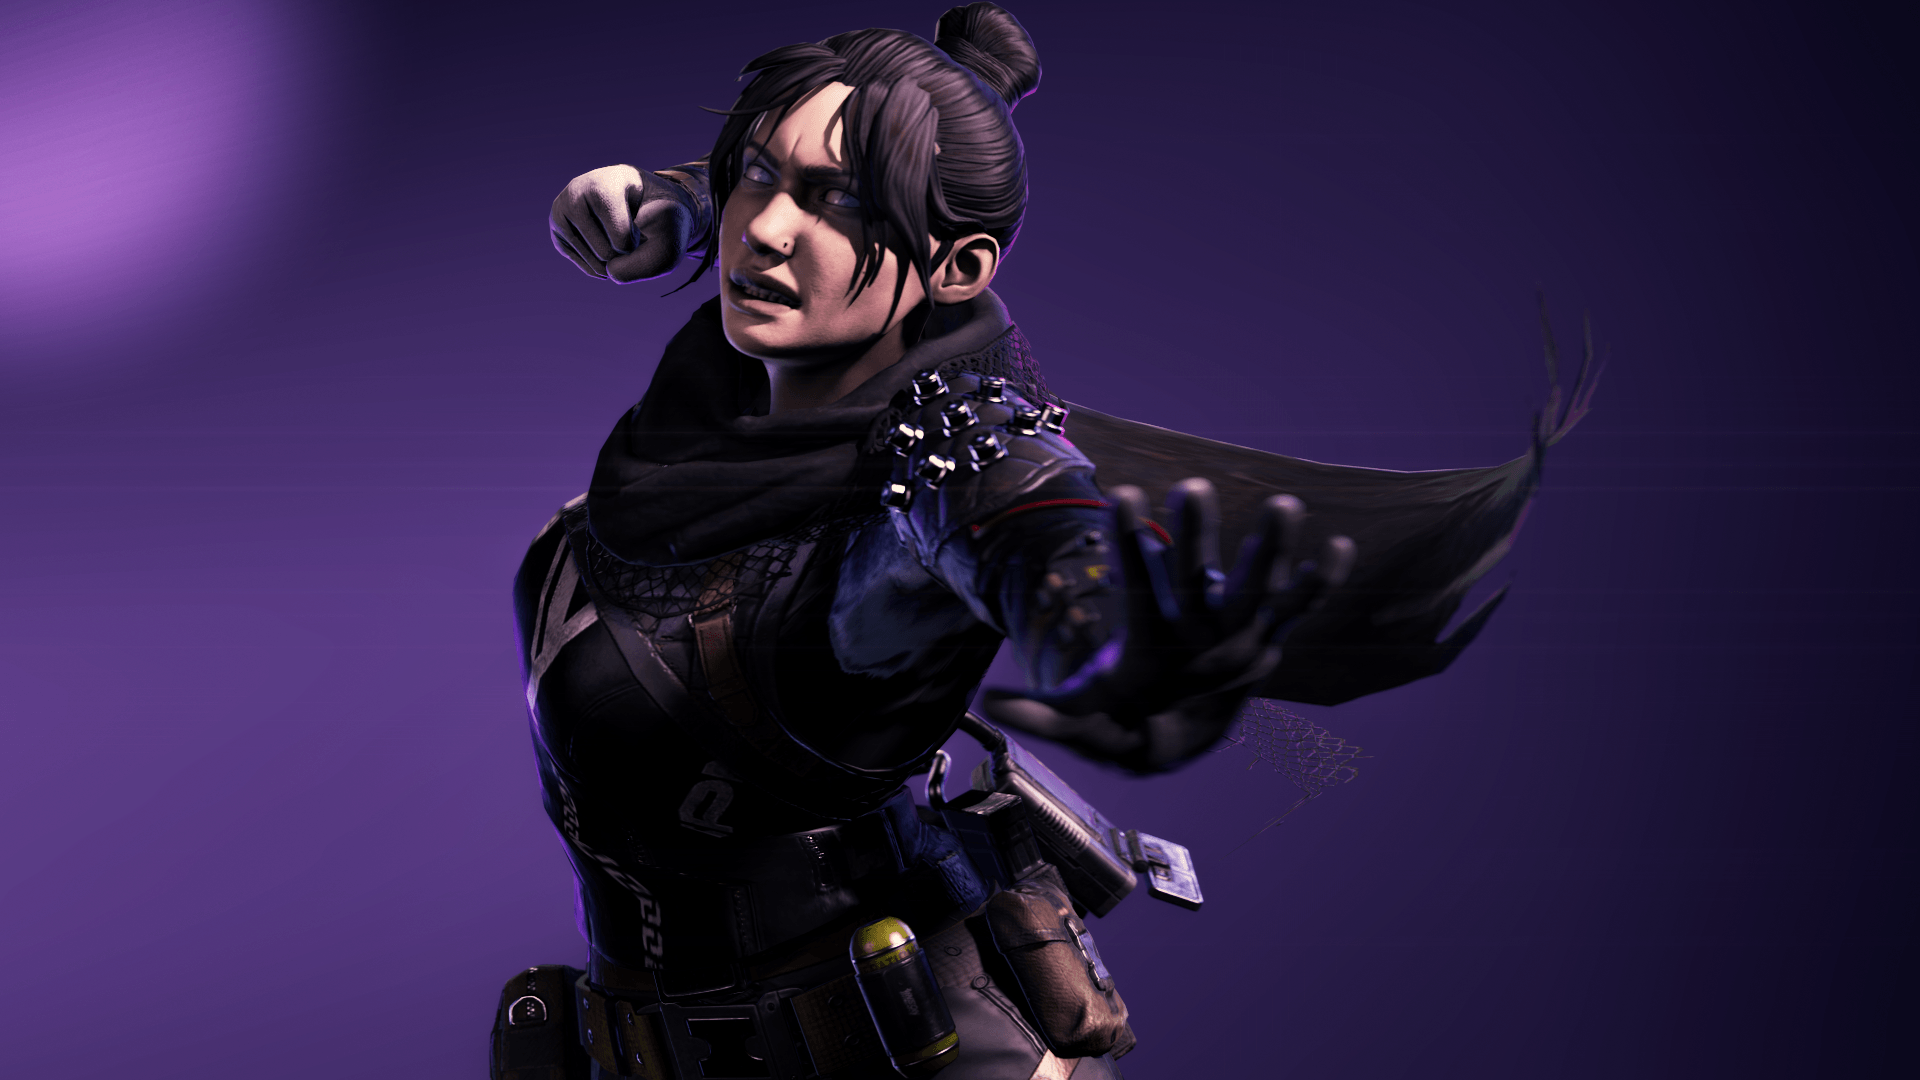 SFM] I made this Wraith Render/Wallpaper, feel free to use it